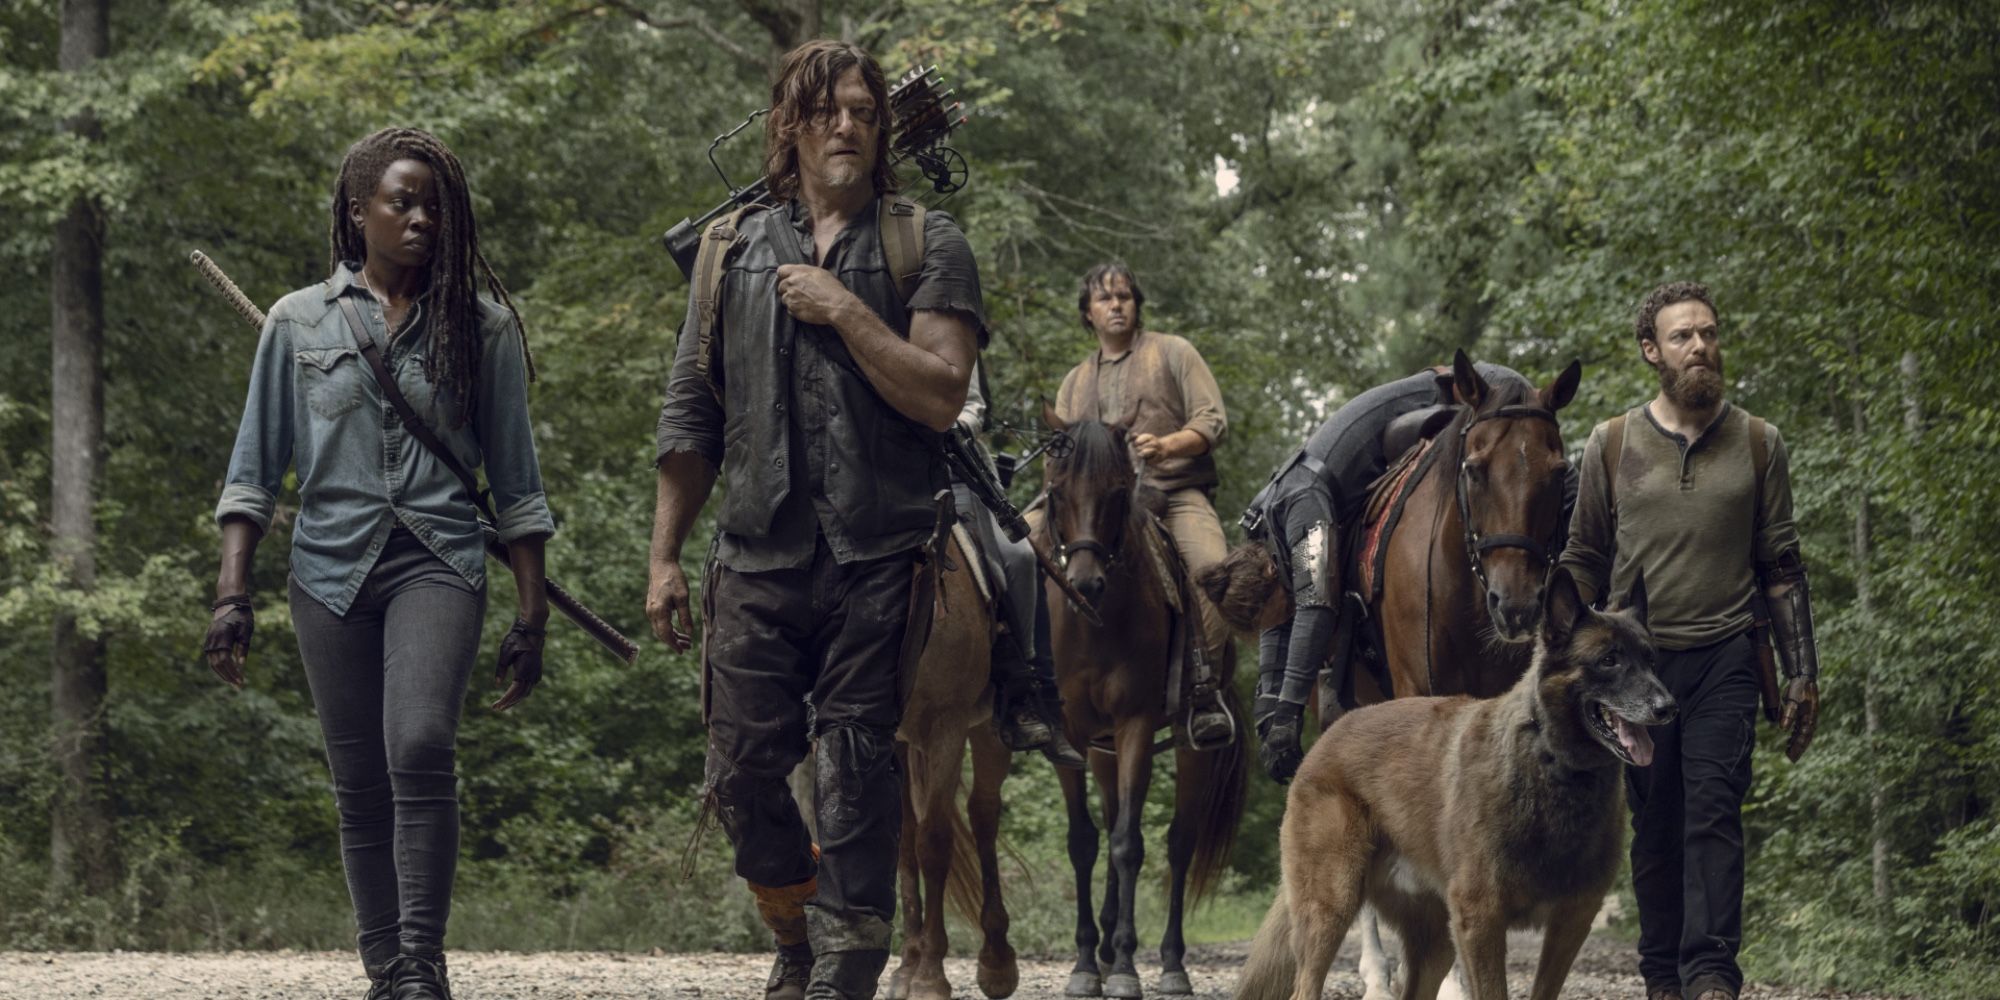 Daryl leads a party of zombie hunters, and Dog, on The Walking Dead